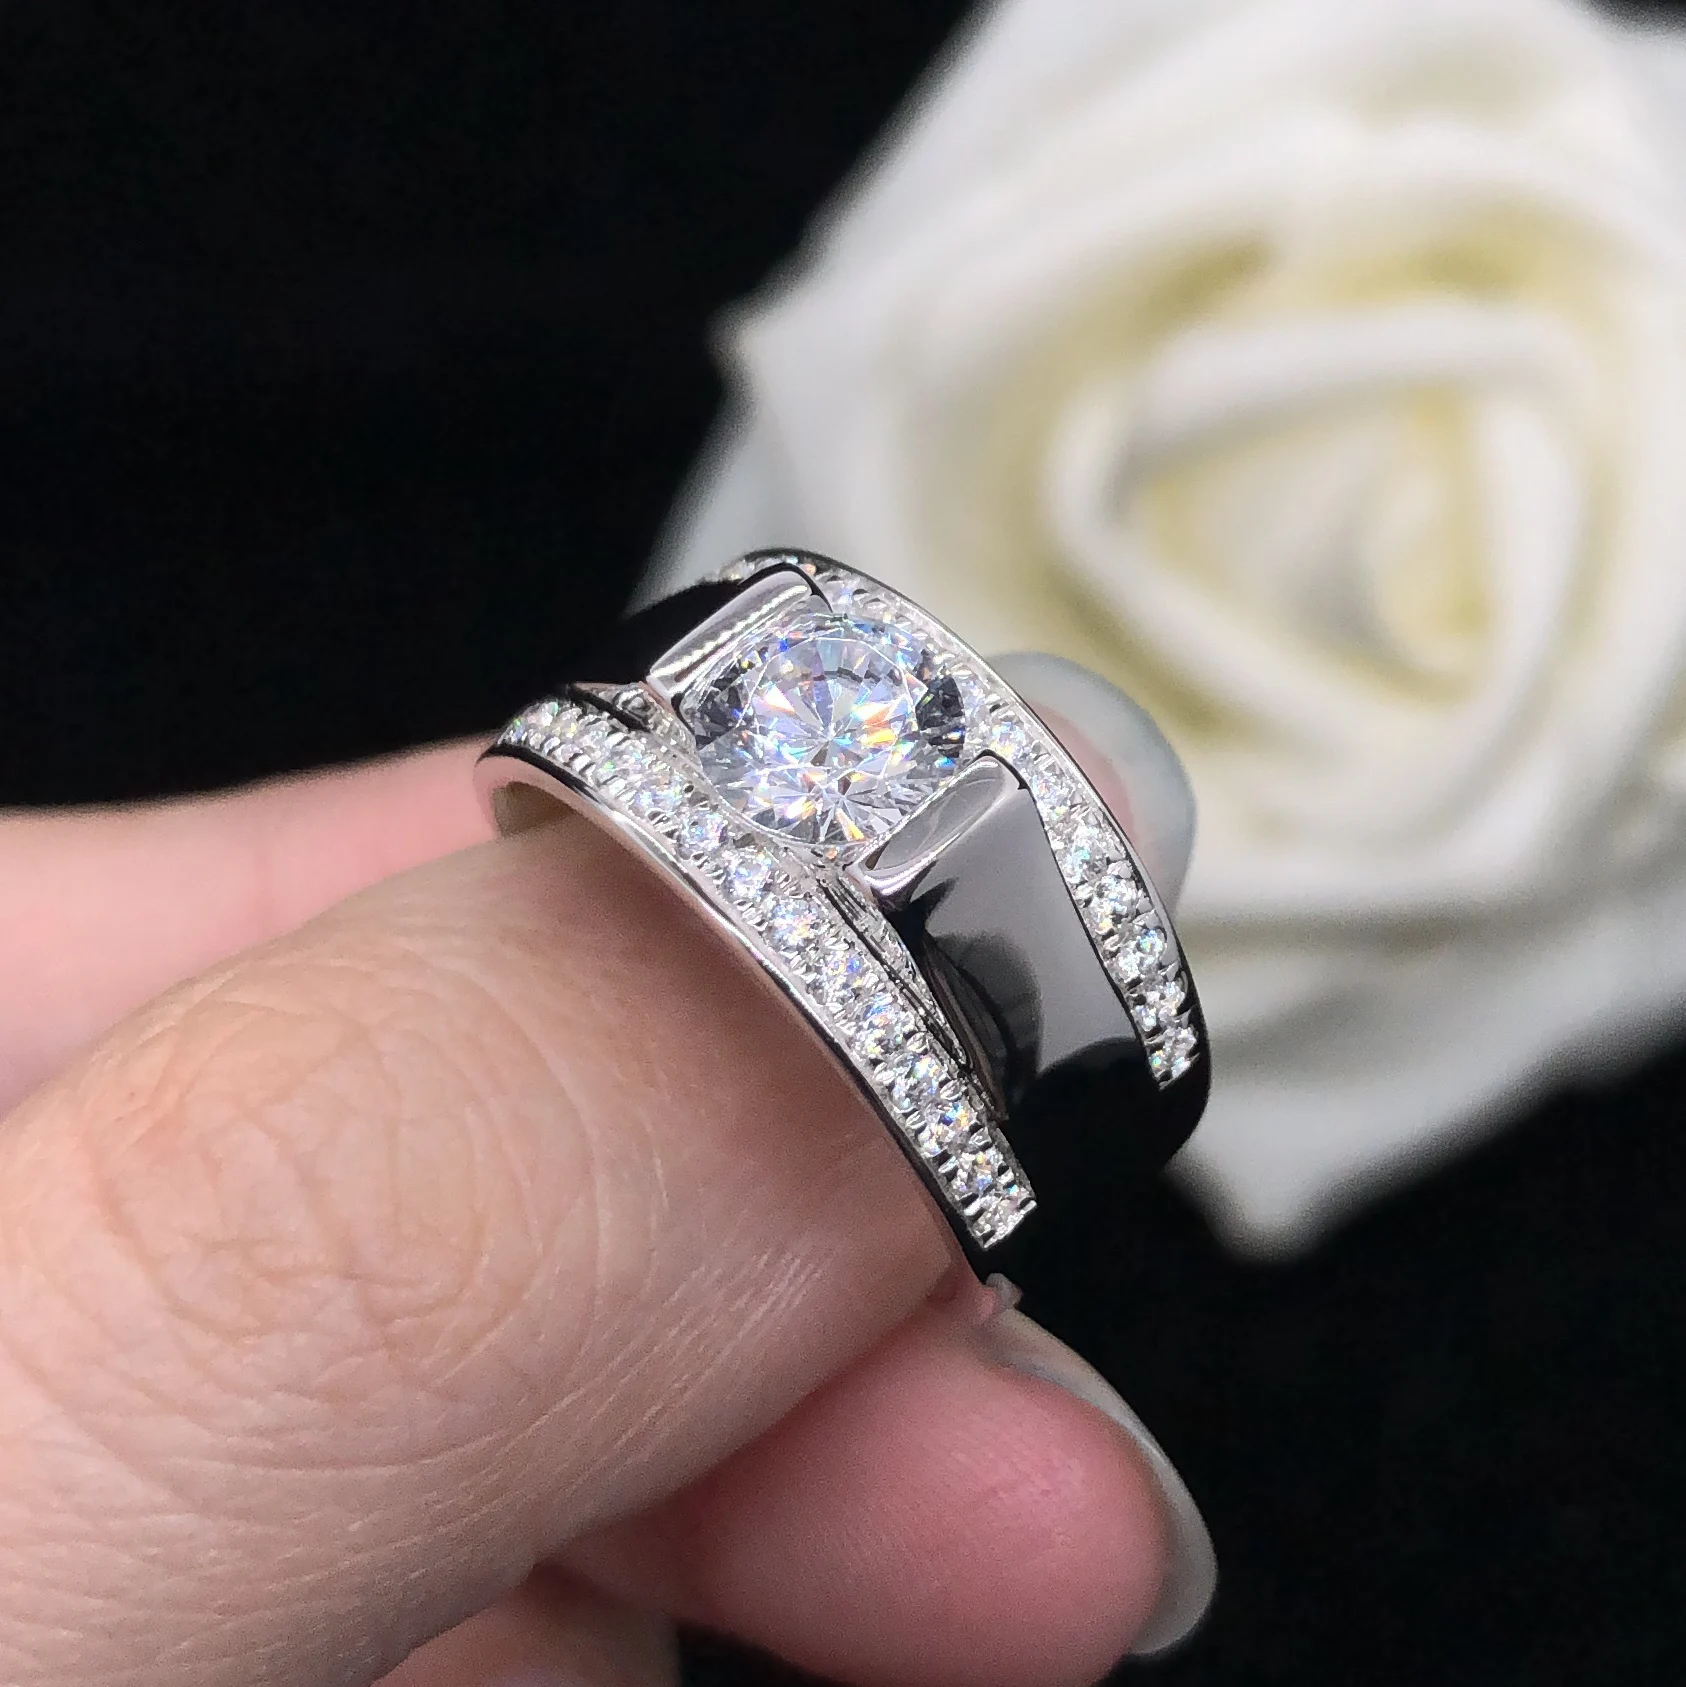 

Male Ring Super Brilliant 1Ct Round Cut Diamond Ring Engagement Male Jewelry Solid Platinum 950 Ring R079